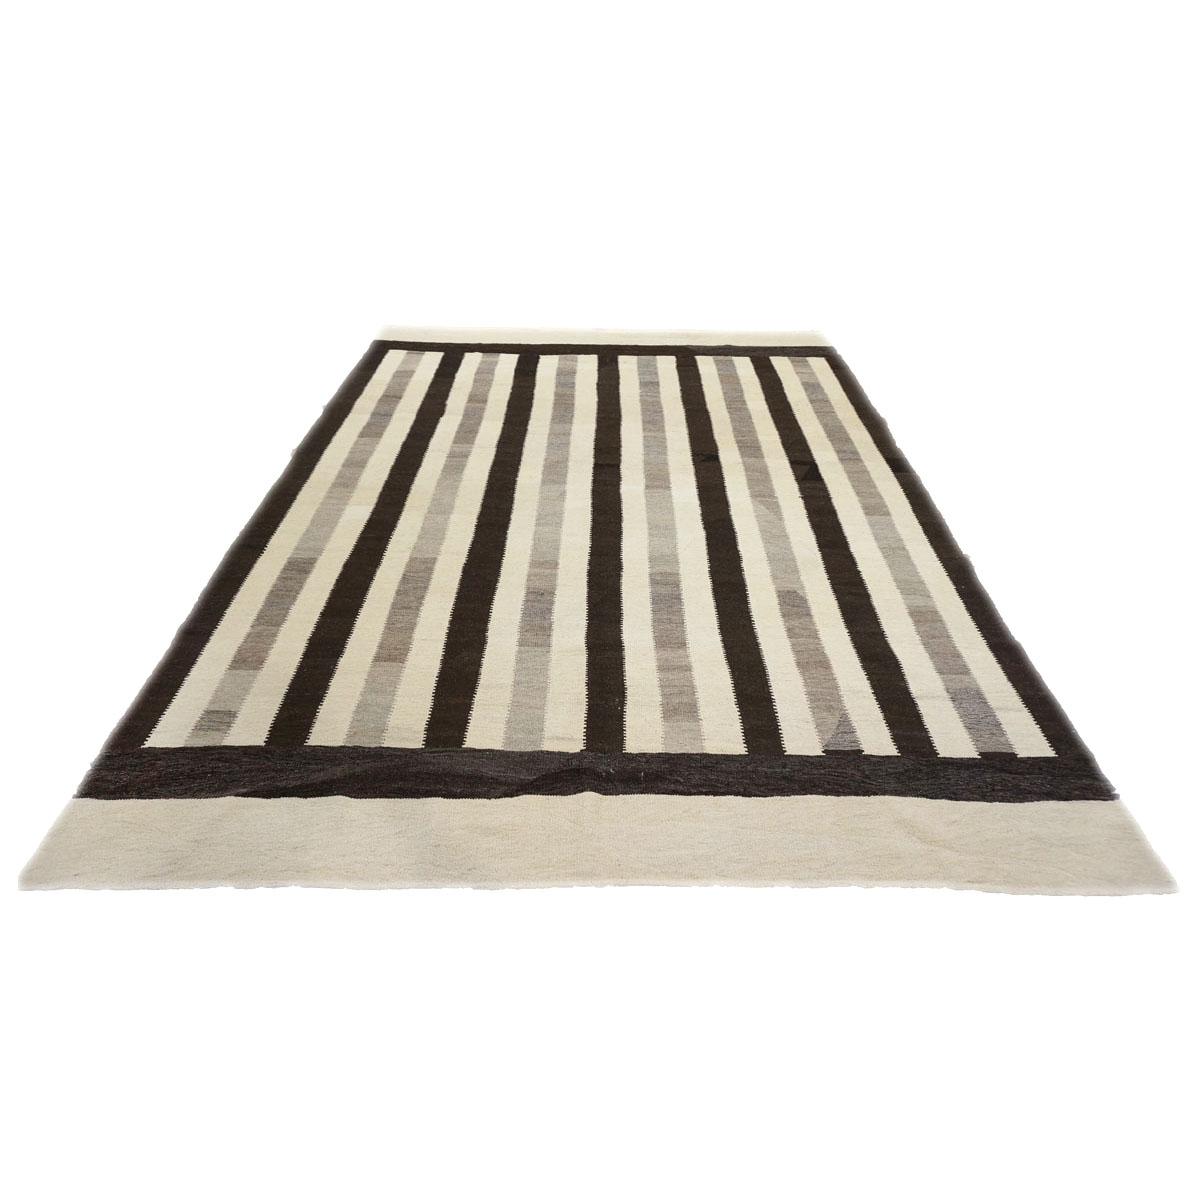 Ashly Fine Rugs presents a 21st Century Persian Flatweave Safari Kilim 8x11 Ivory & Brown Handmade Area Rug. This piece is made with 100% hand-twisted wool fibers, featuring a beautifully natural ivory background with dark brown and light grey